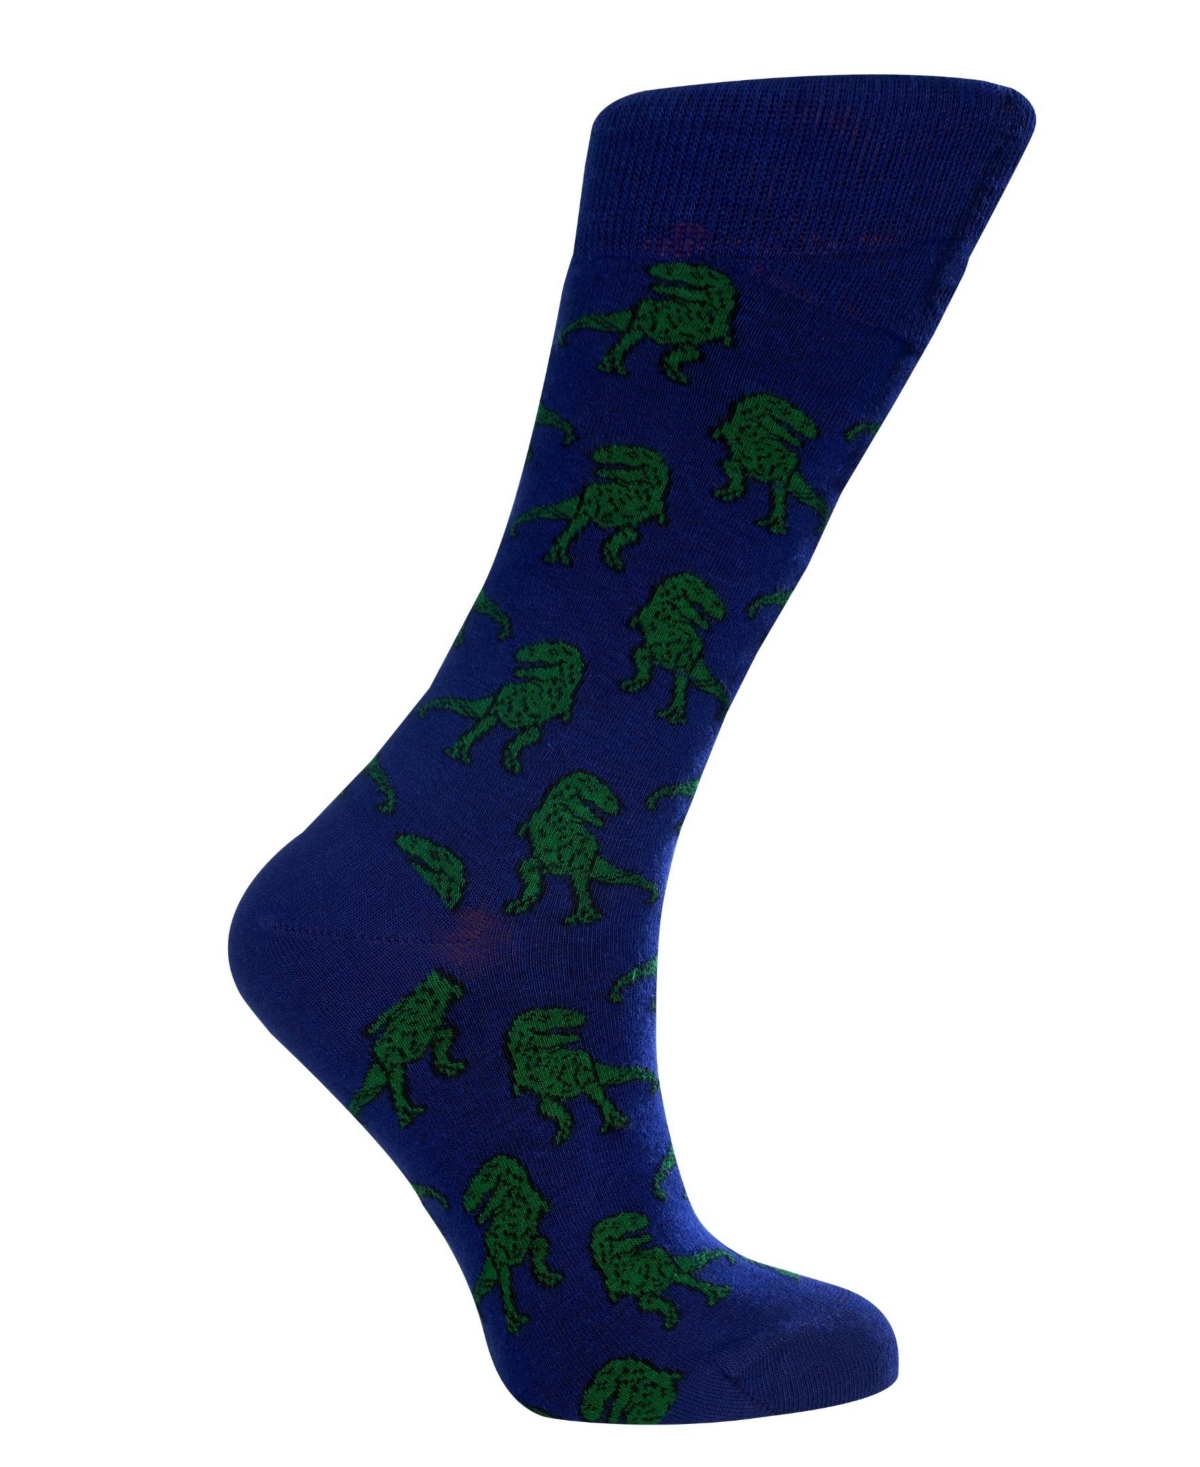 Love Sock Company Women's T-Rex W-Cotton Novelty Crew Socks with Seamless Toe Design, Pack of 1